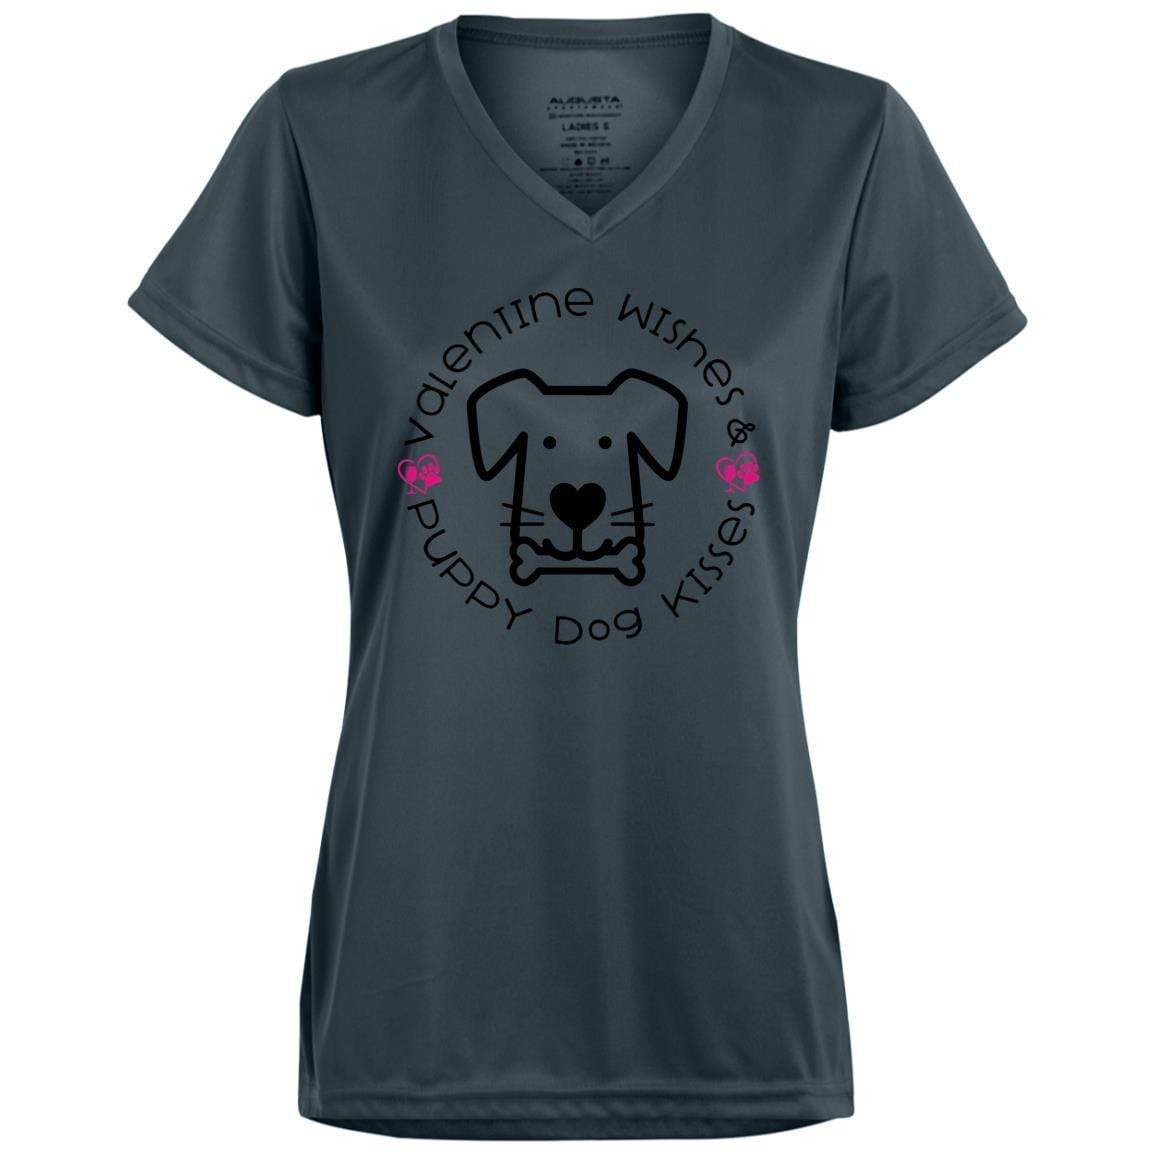 T-Shirts Graphite / X-Small Winey Bitches Co 'Valentine Wishes and Puppy Dog Kisses" (Dog) Ladies' Wicking T-Shirt WineyBitchesCo